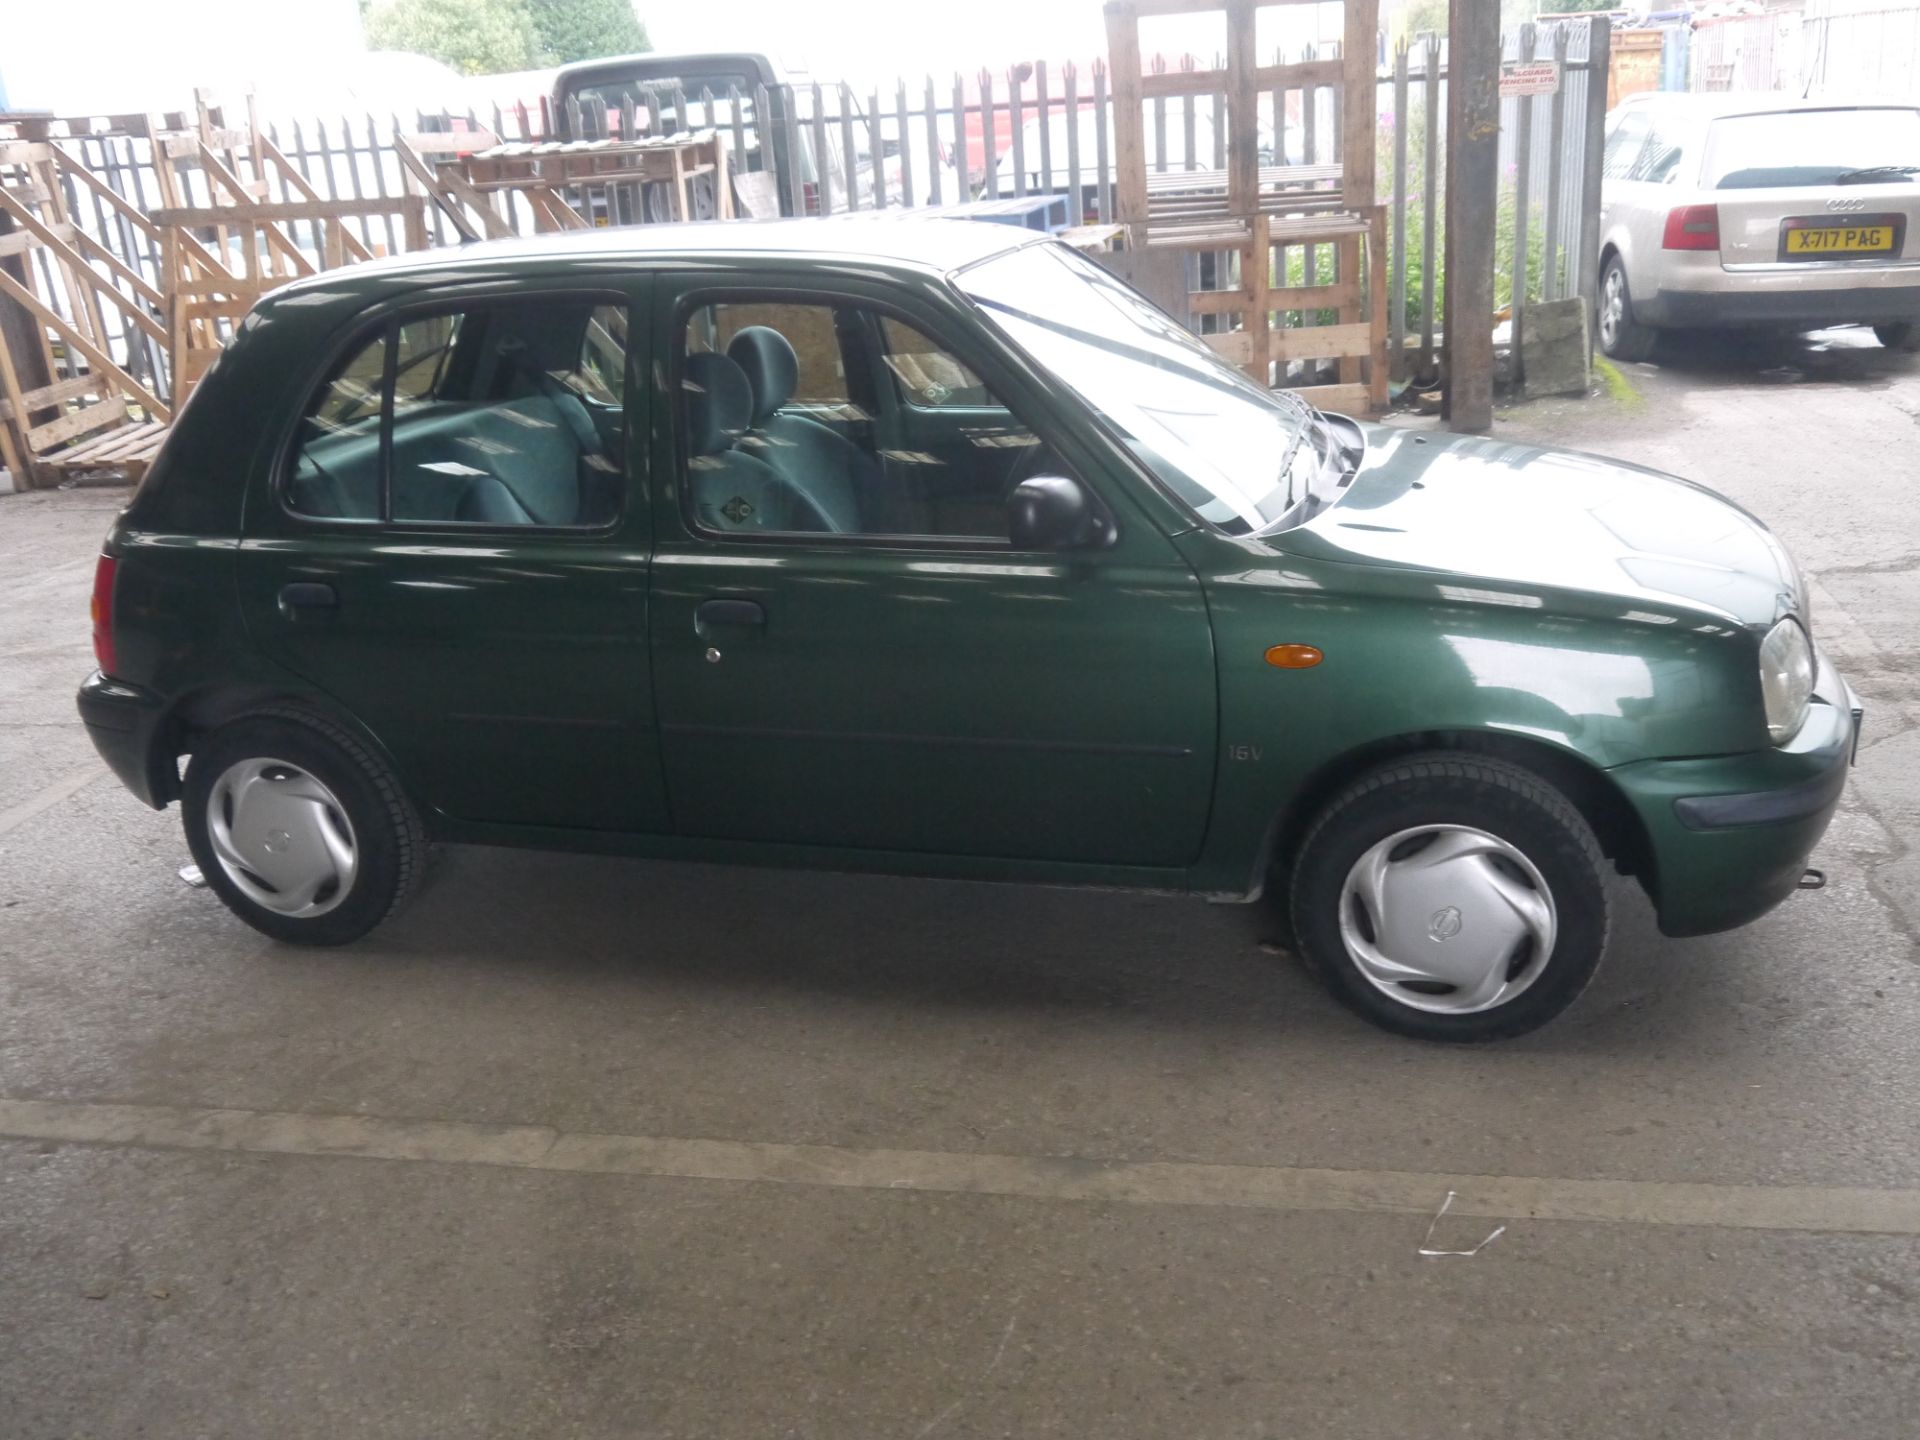 S Reg Nissan Micra, 5 door hatch back, 85,000miles, 1ltr Petrol.  In excellent condition for age. - Image 2 of 8